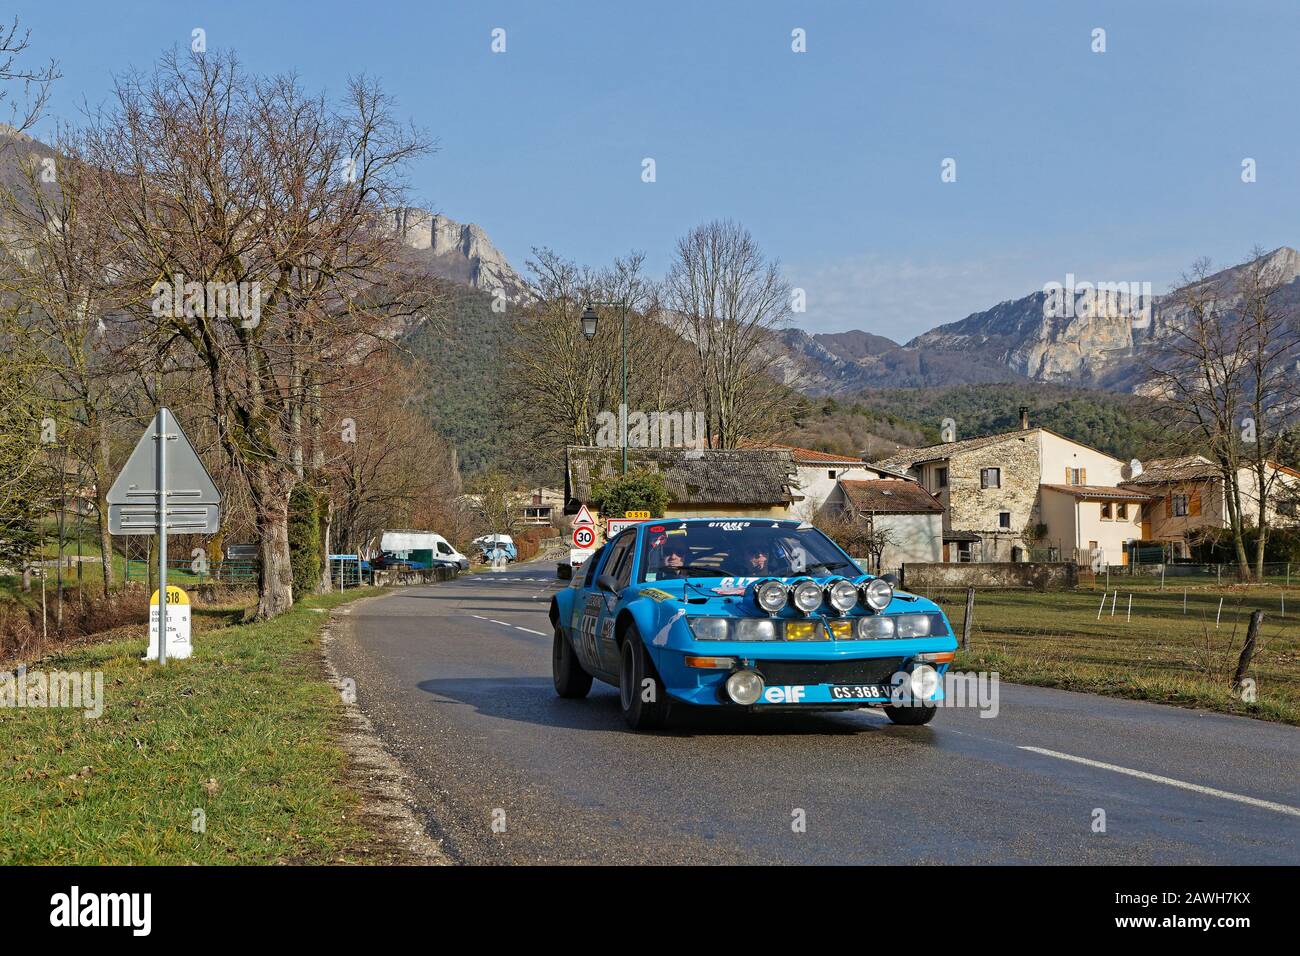 CHAMALOC, FRANCE, February 3, 2020 : Historic Monte-Carlo Rally runs on the roads of South of France. This 23rd edition hosts 310 teams from 28 coun Stock Photo